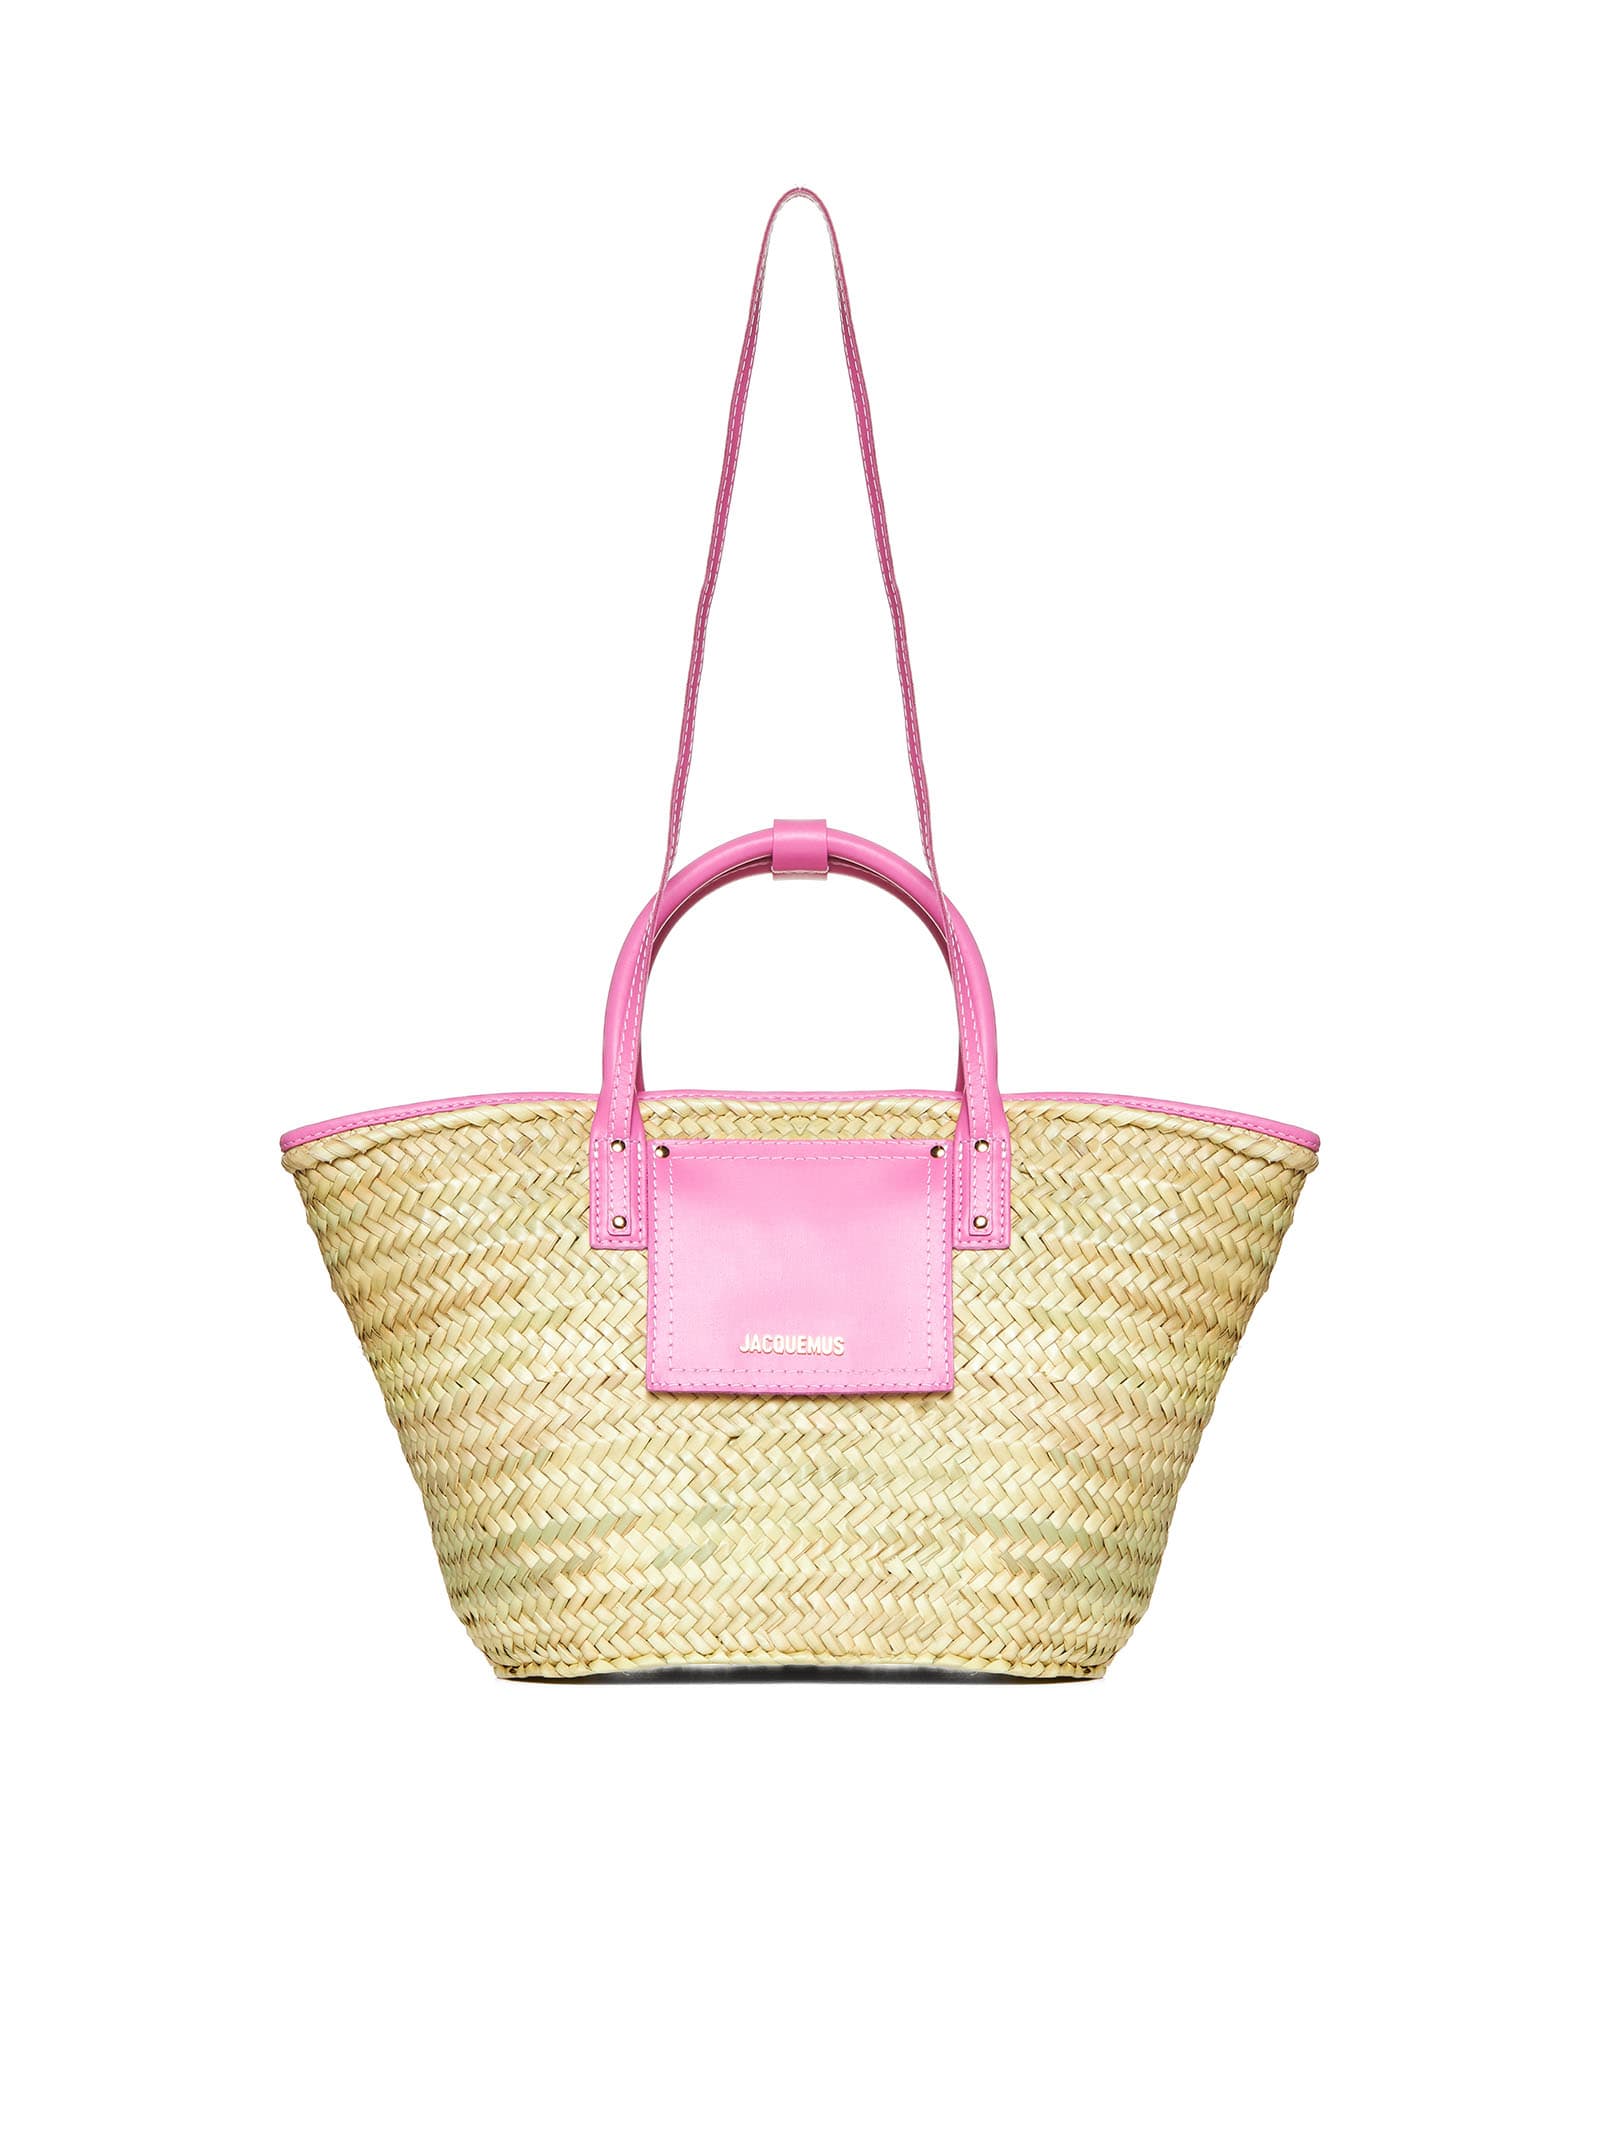 Jacquemus Tote In Neon Pink